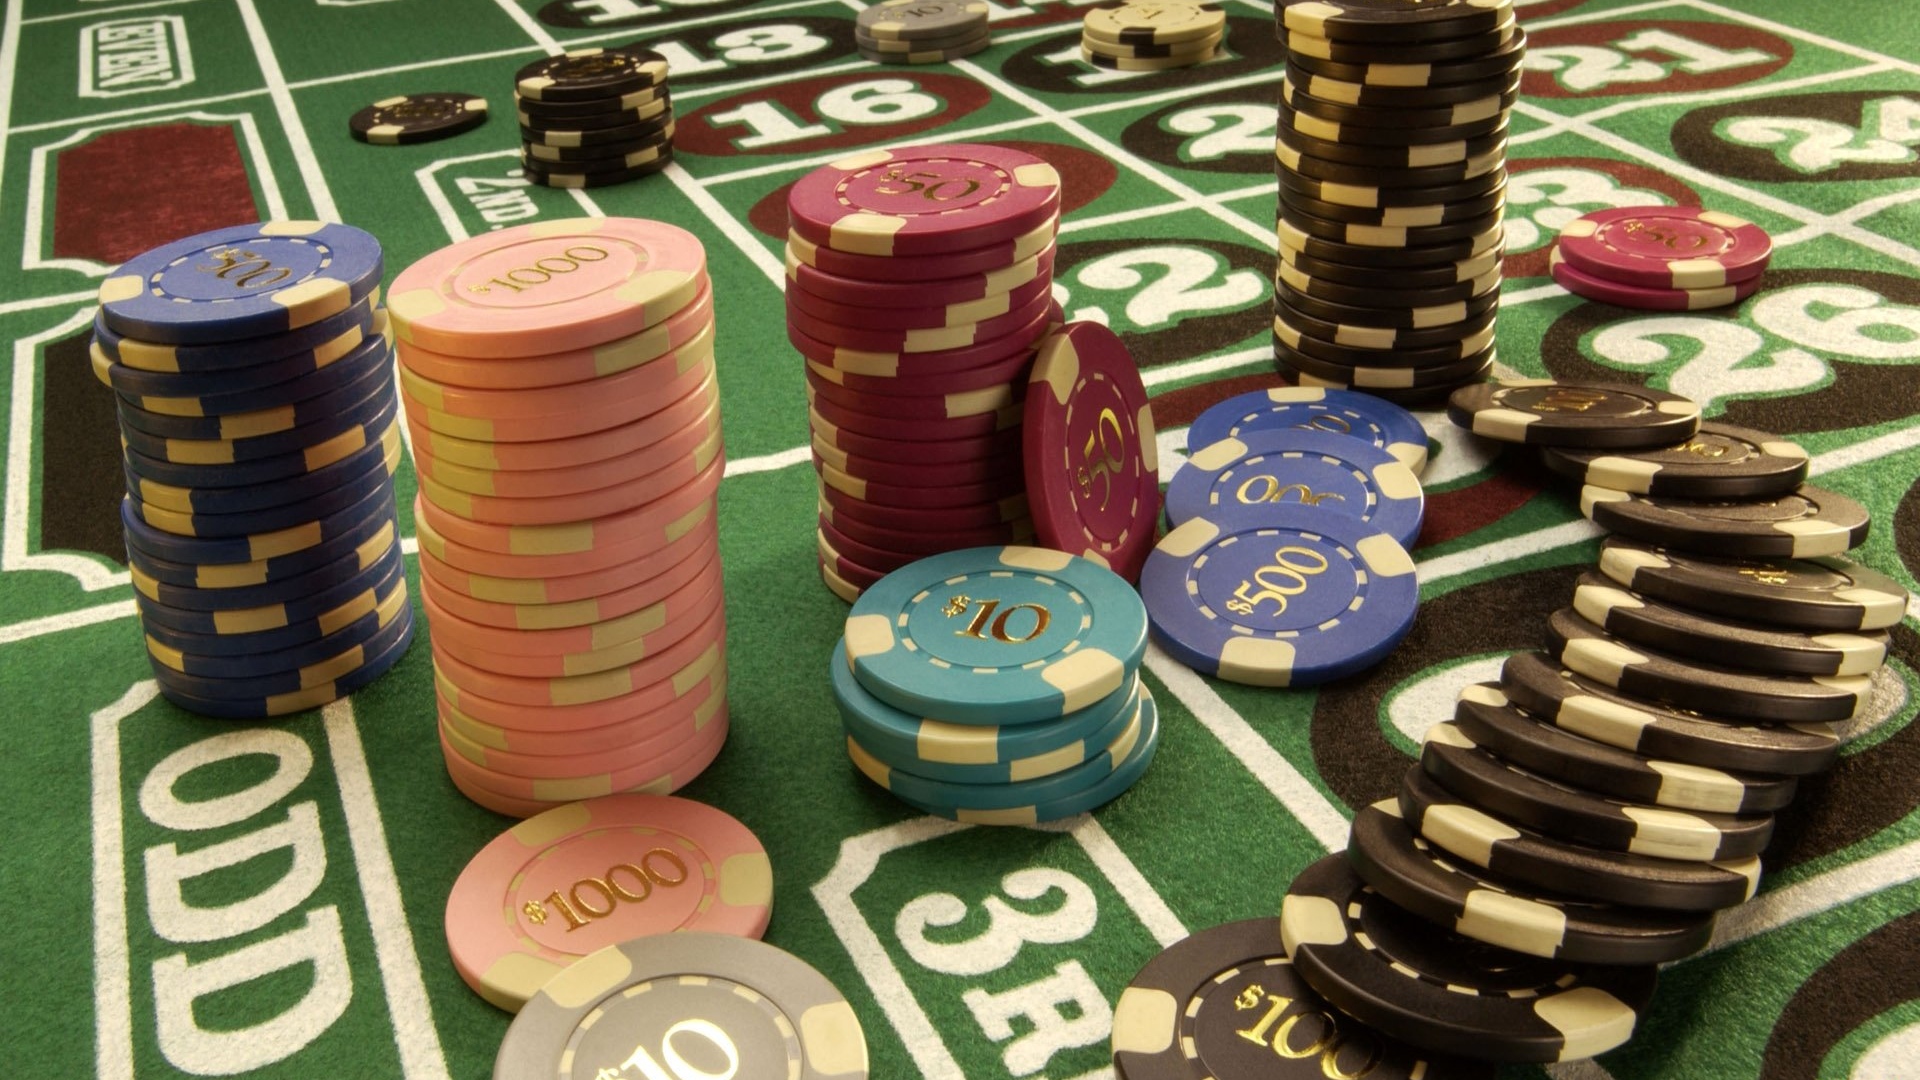 Gambling: Online or Offline? Find out Why Online Gambling is Fun! post thumbnail image